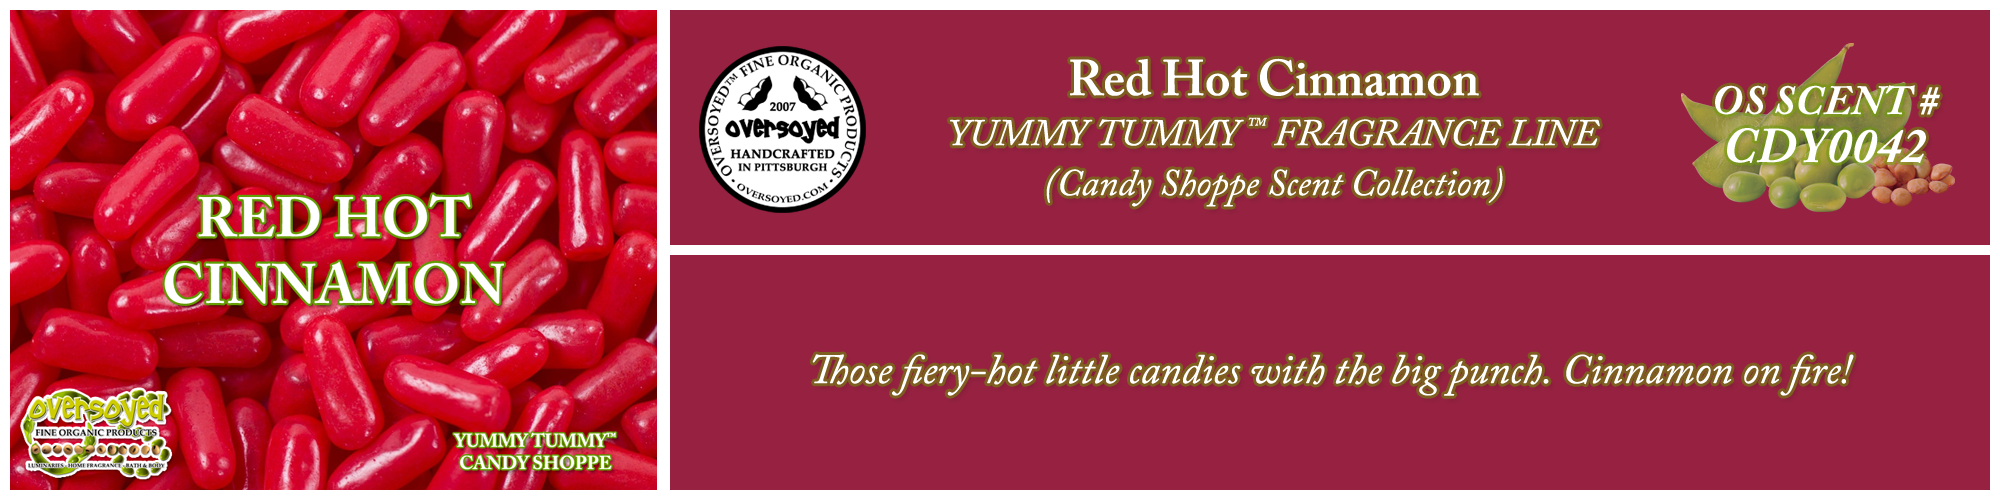 Red Hot Cinnamon Handcrafted Products Collection